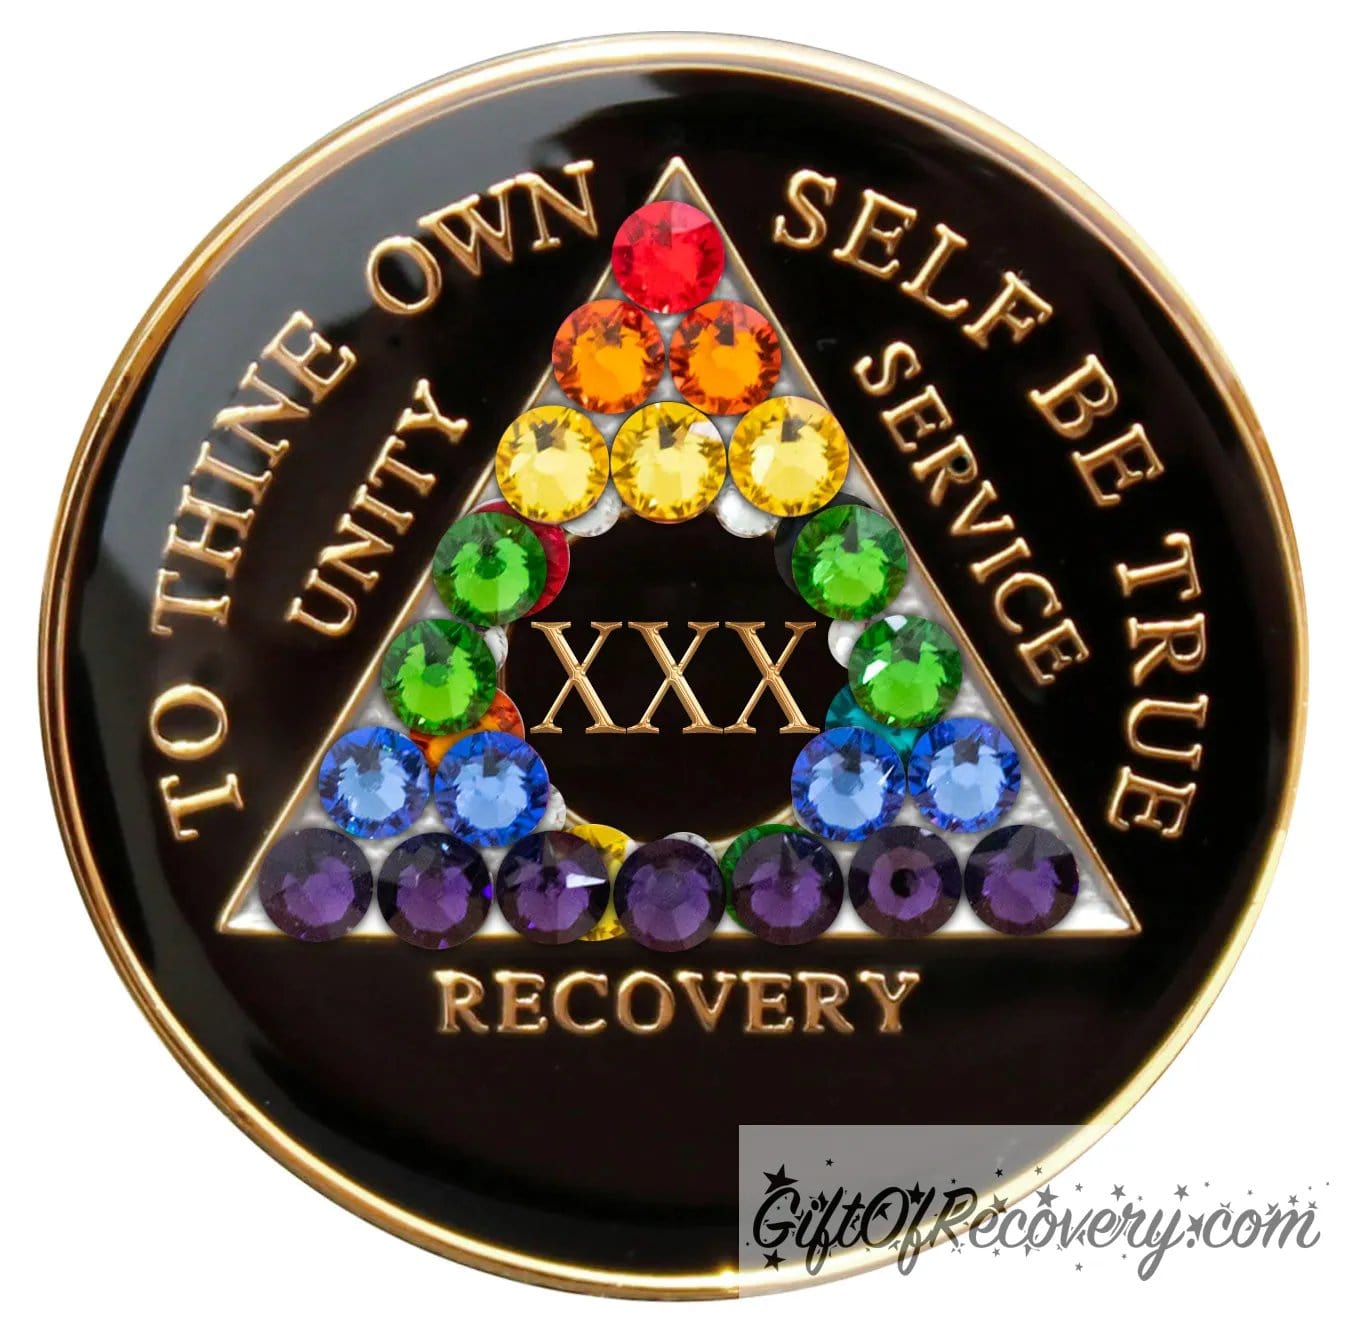 30 year AA medallion with 21 rainbow genuine crystals to represent the LBGTQIA+ community, show your pride with this Black onyx resin sealed recovery medallion that has 14k gold plated brass lettering of to thine own self be true, unity, service, recovery, and the roman numeral.